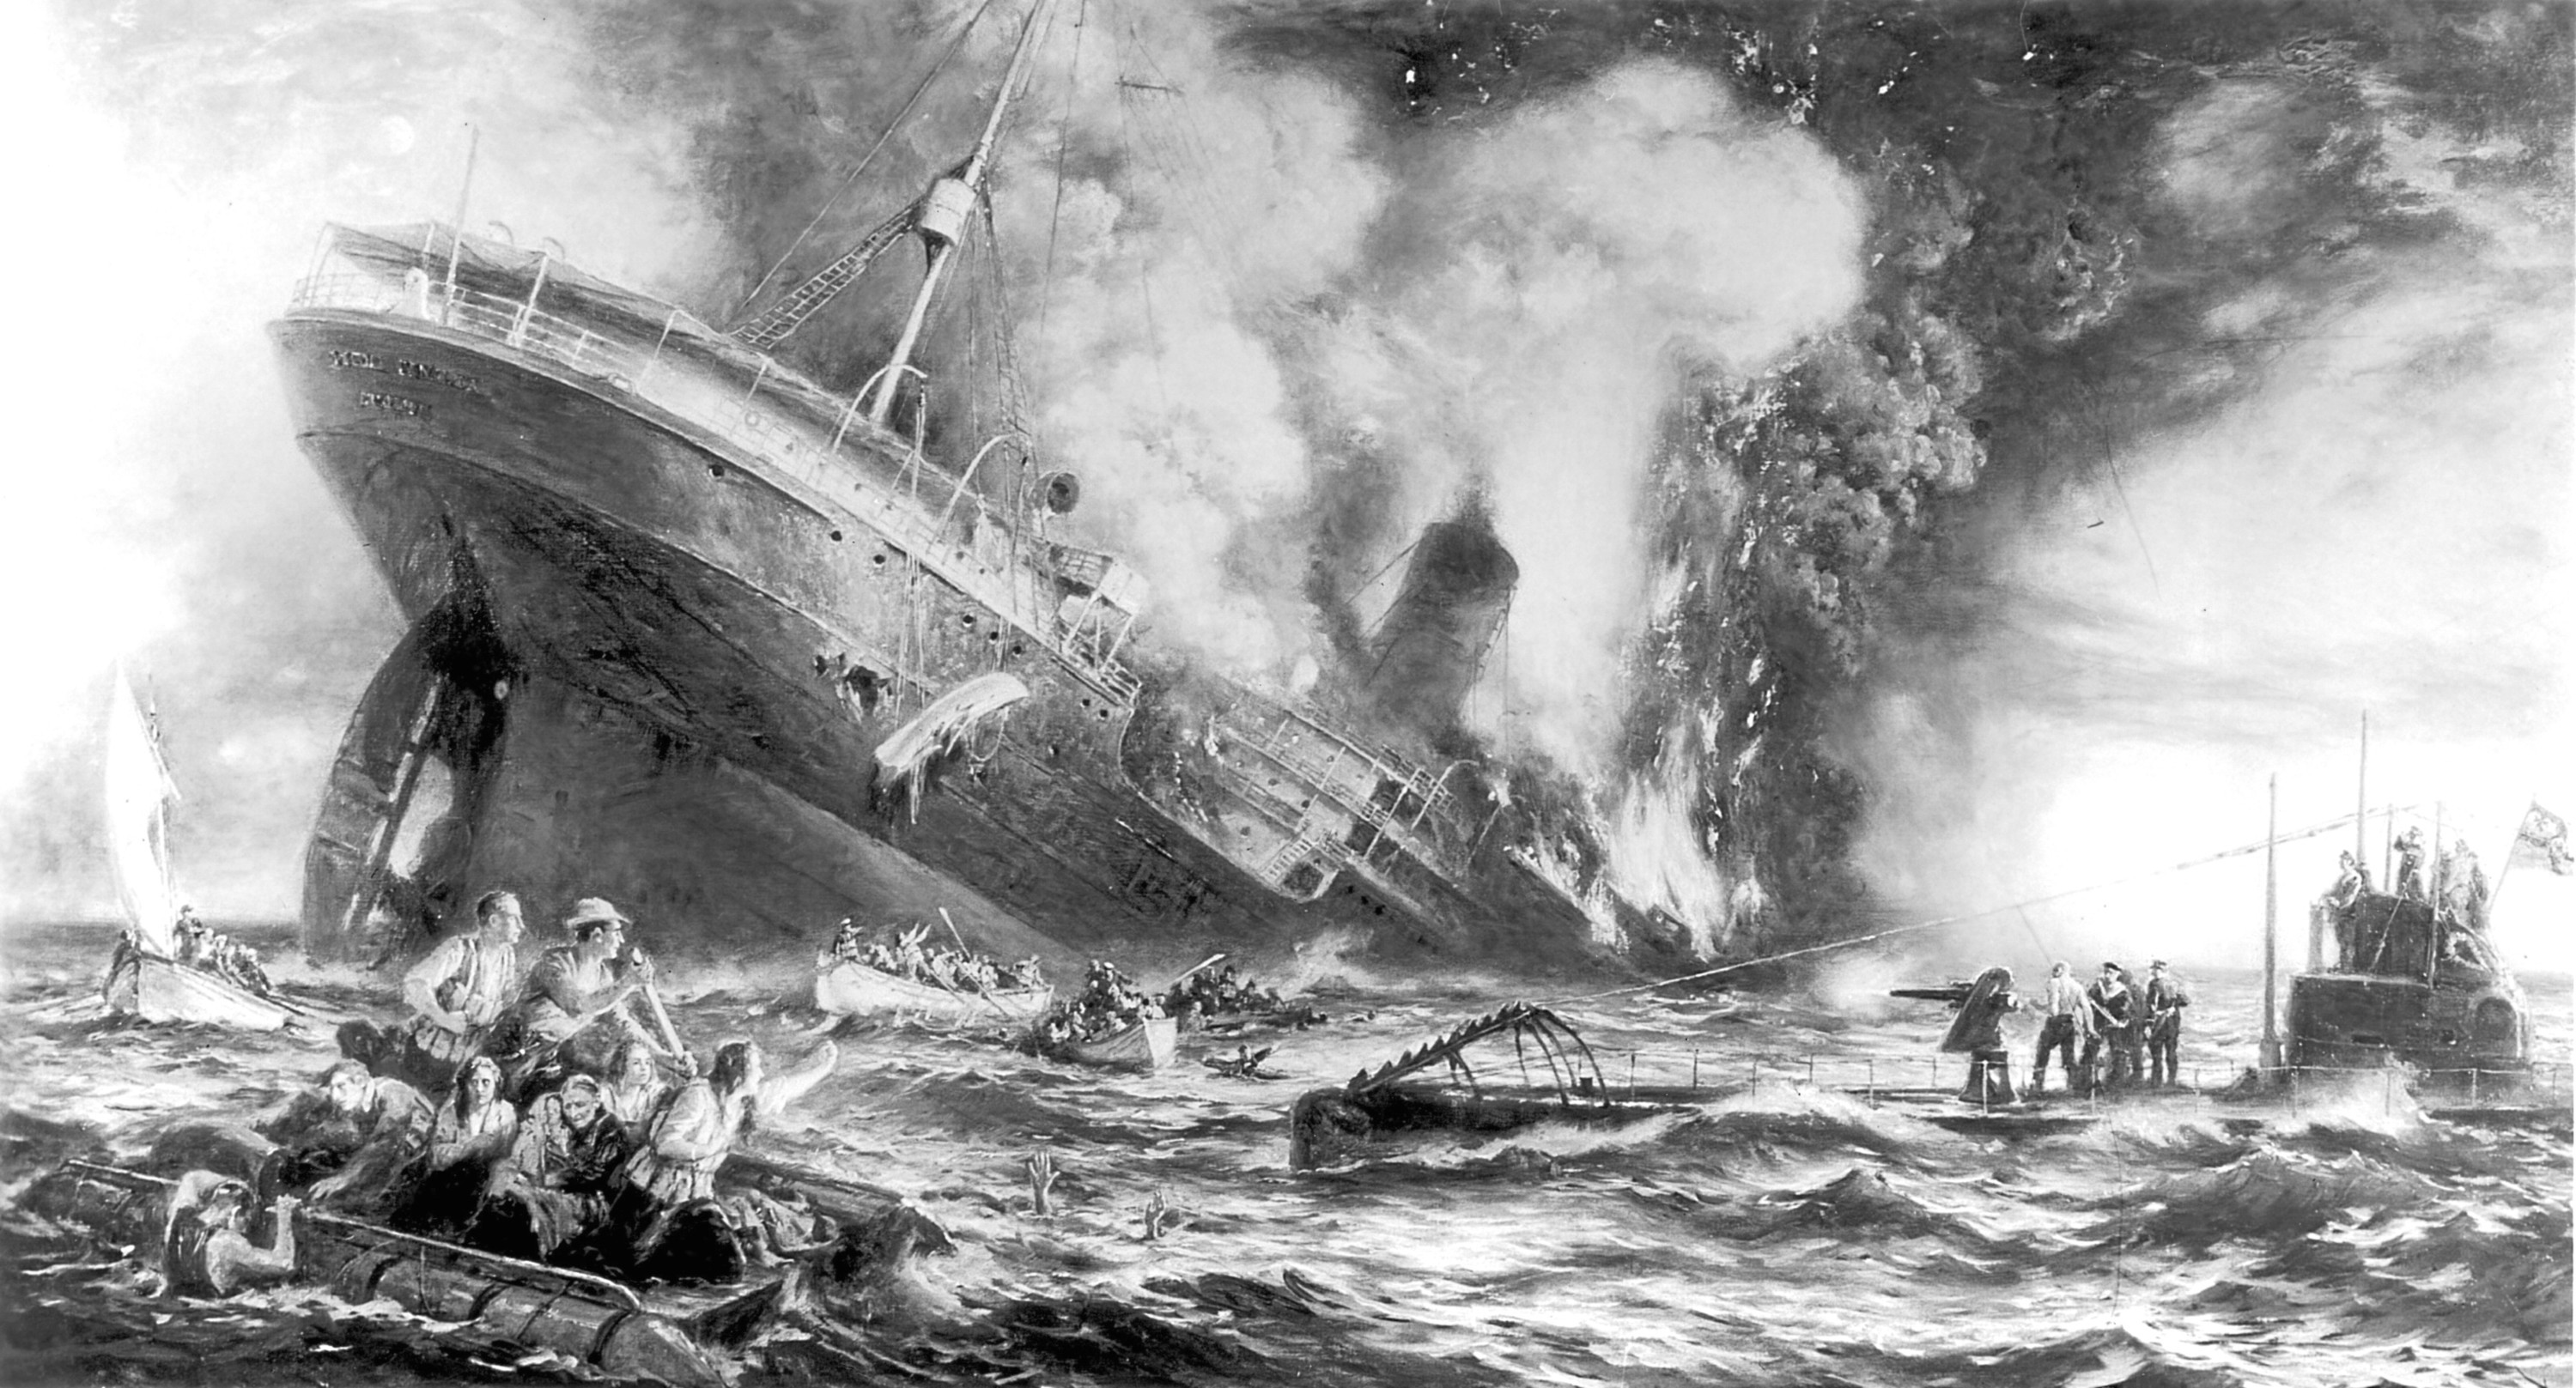 Conspiracy theorists maintain that the sinking of the Lusitania was no accident (Three Lions/Getty Images)